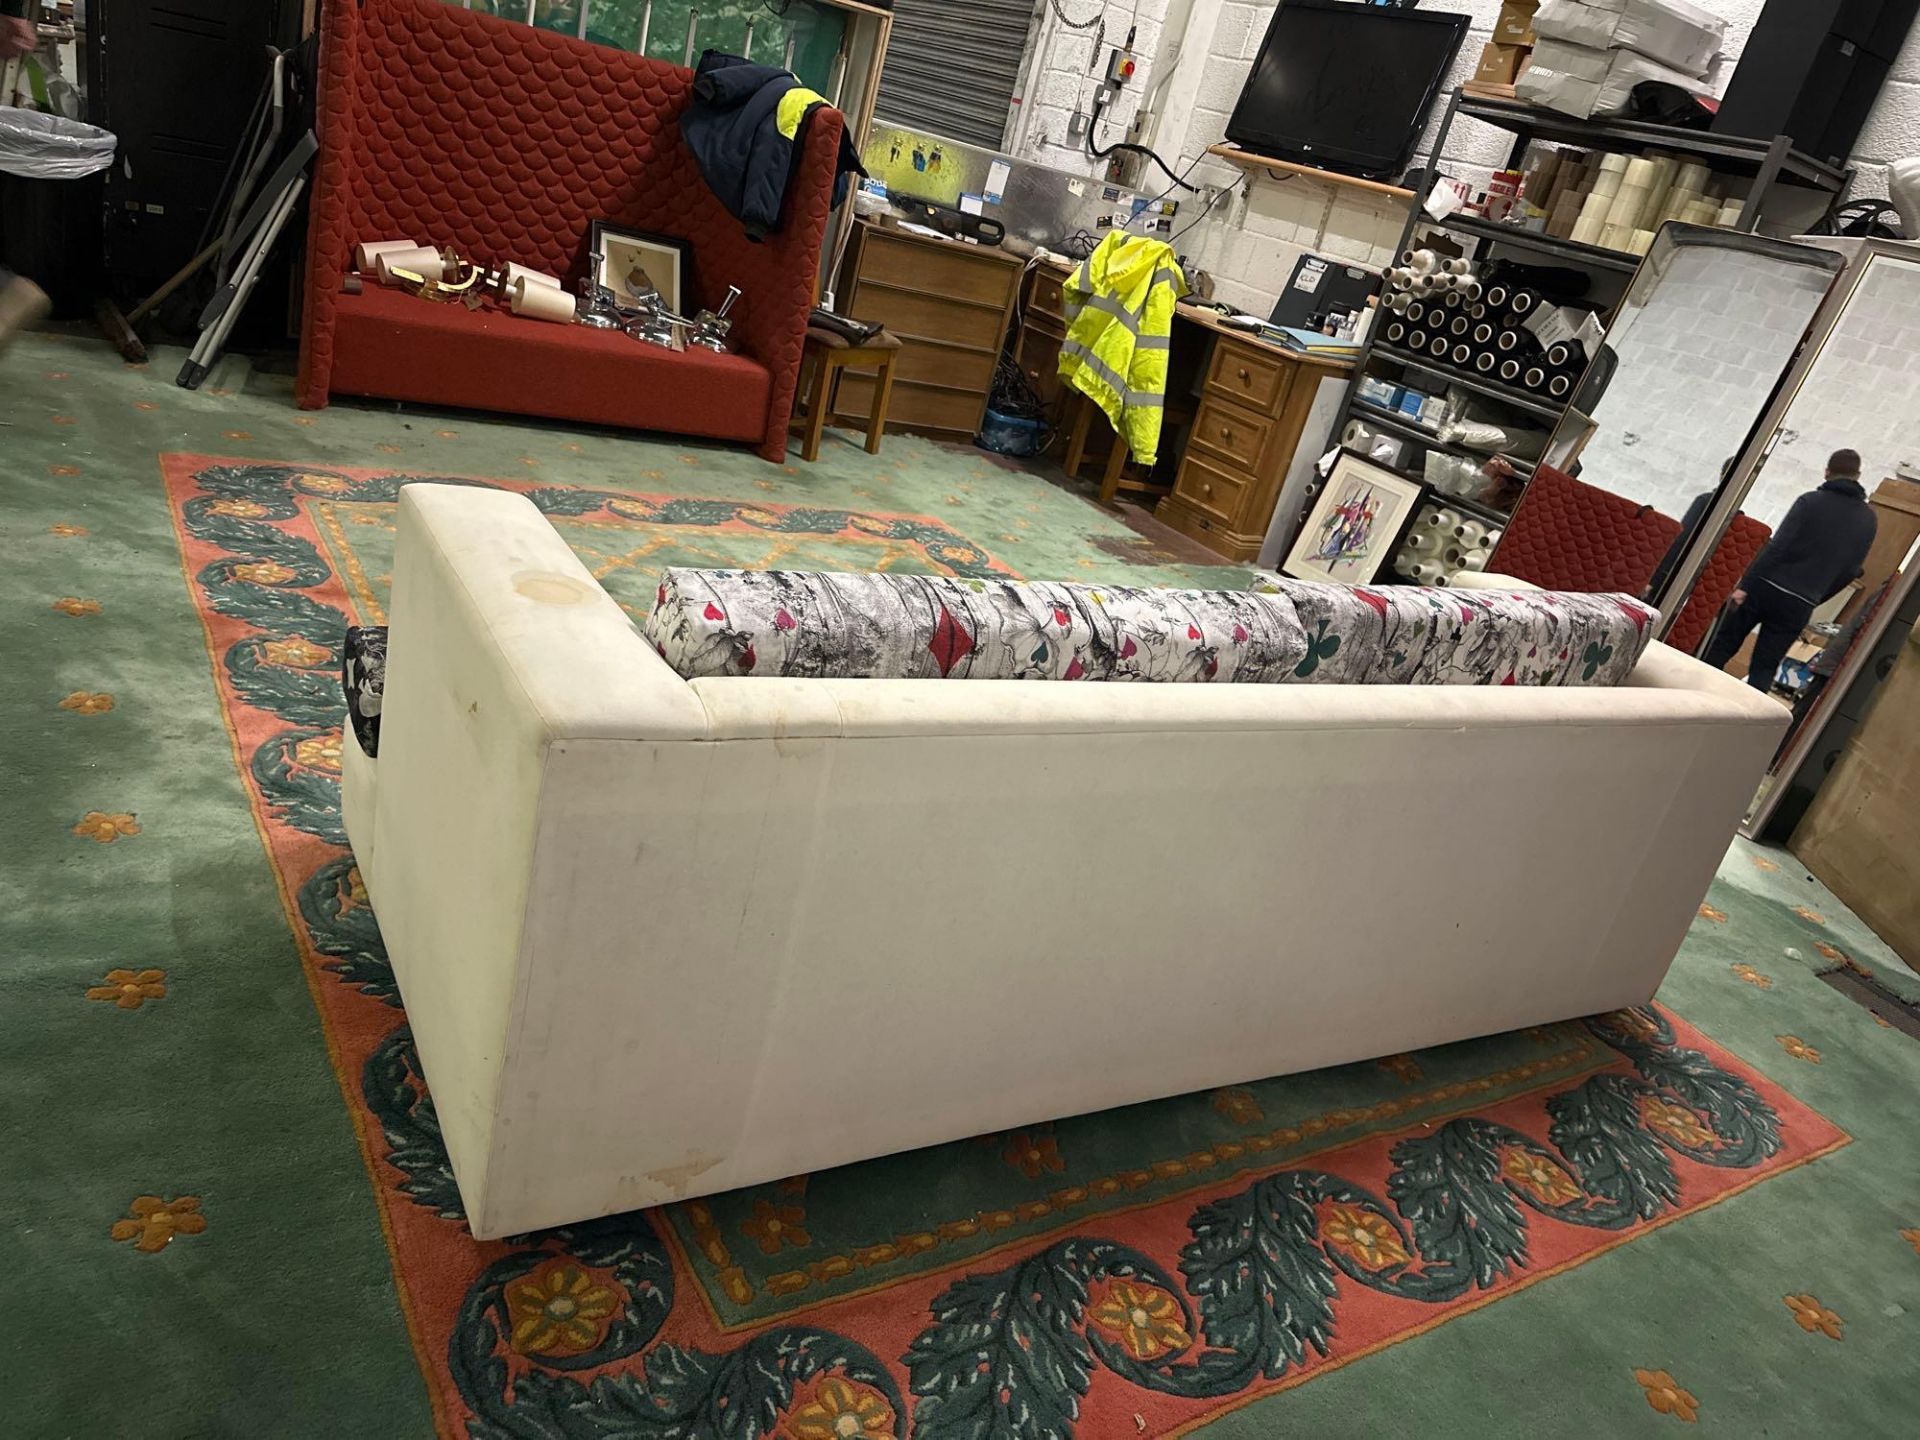 Cream Upholstered Sofa With Patterned Upholstered Cushions 224 X 91 X 72 cm (Lots Of Marks Will Need - Image 3 of 7